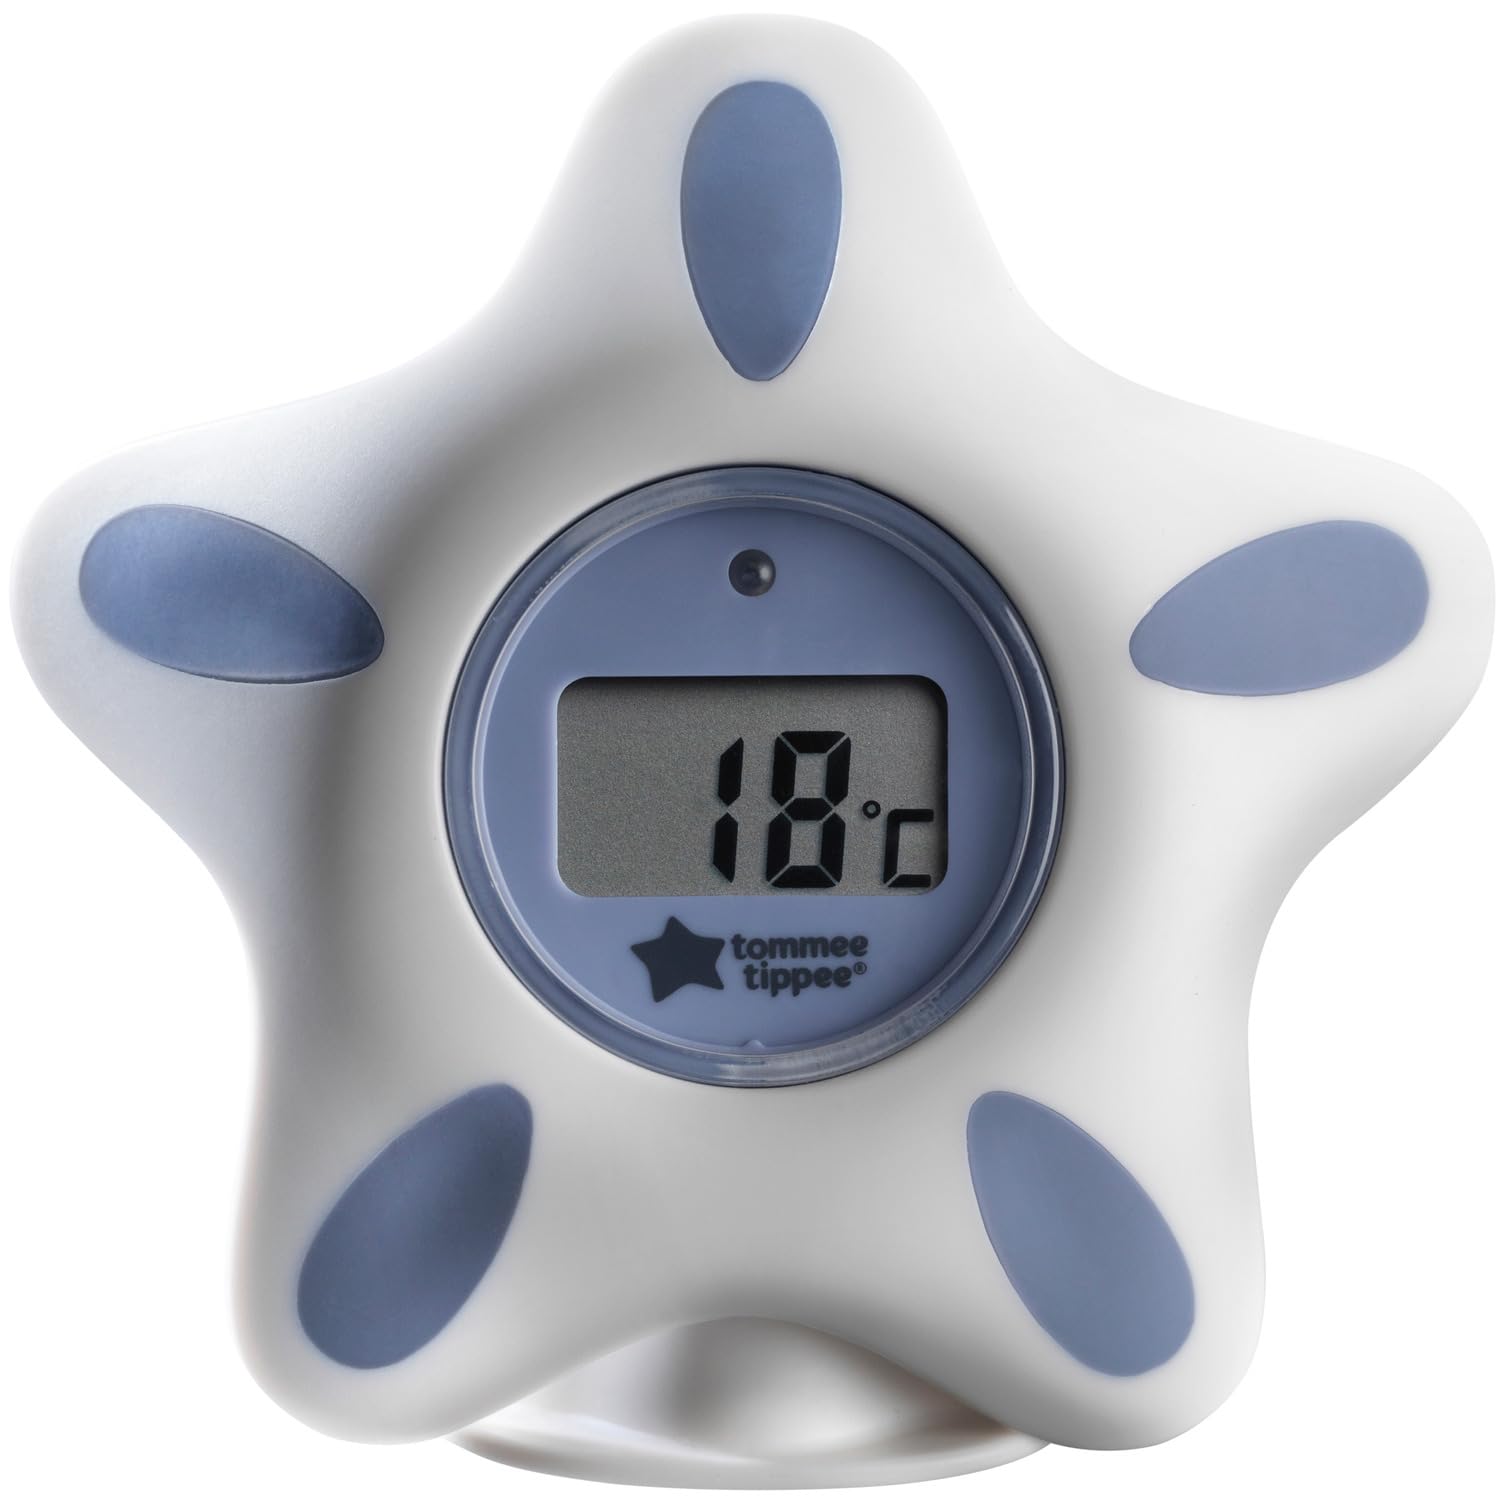 Tendance  Tommee Tippee Closer to Nature Bath and Room Thermometer, White LqjOsK2Ka en vente